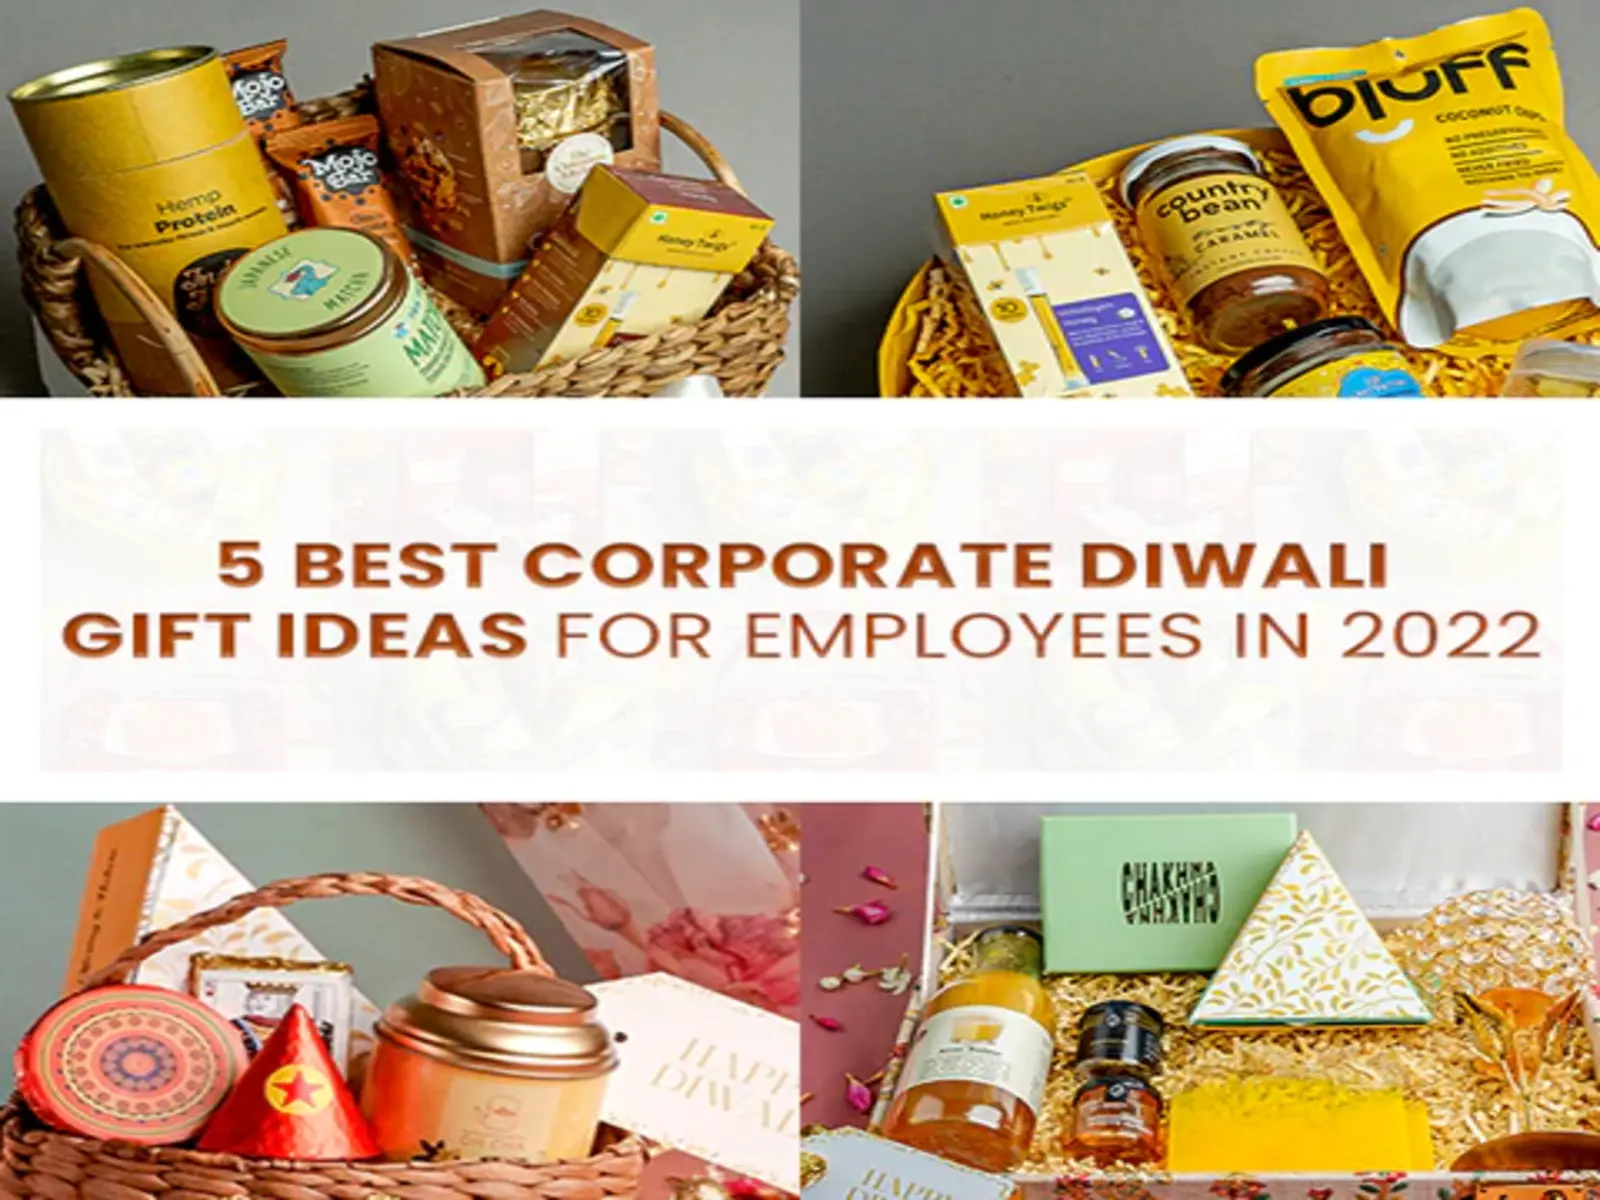 Classic Corporate Gift Set| Corporate Gift Sets | Corporate Diwali Gifts  2022